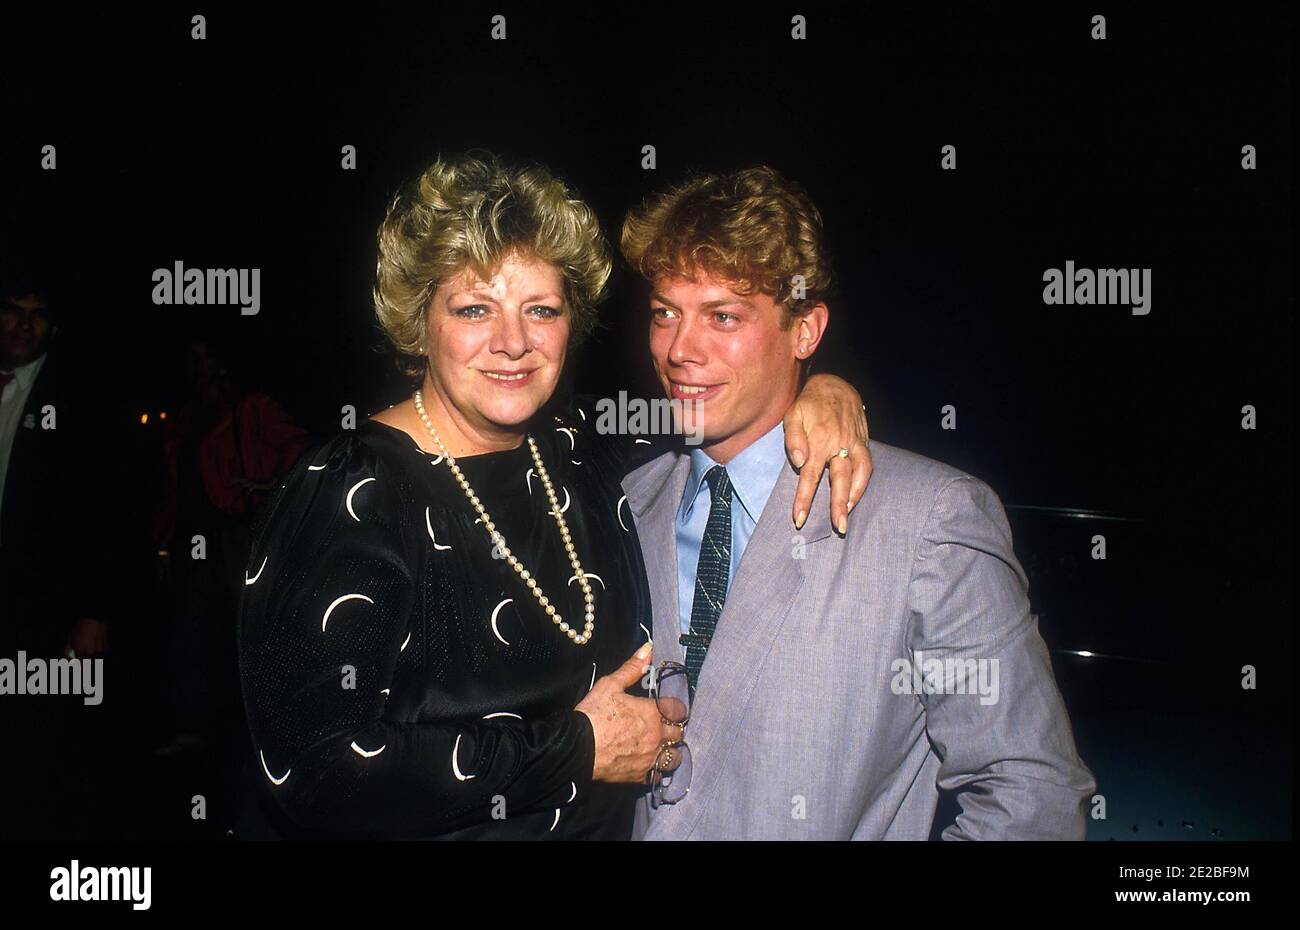 ROSEMARY CLOONEY WITH HER SON RAFAEL   Credit: Ralph Dominguez/MediaPunch Stock Photo